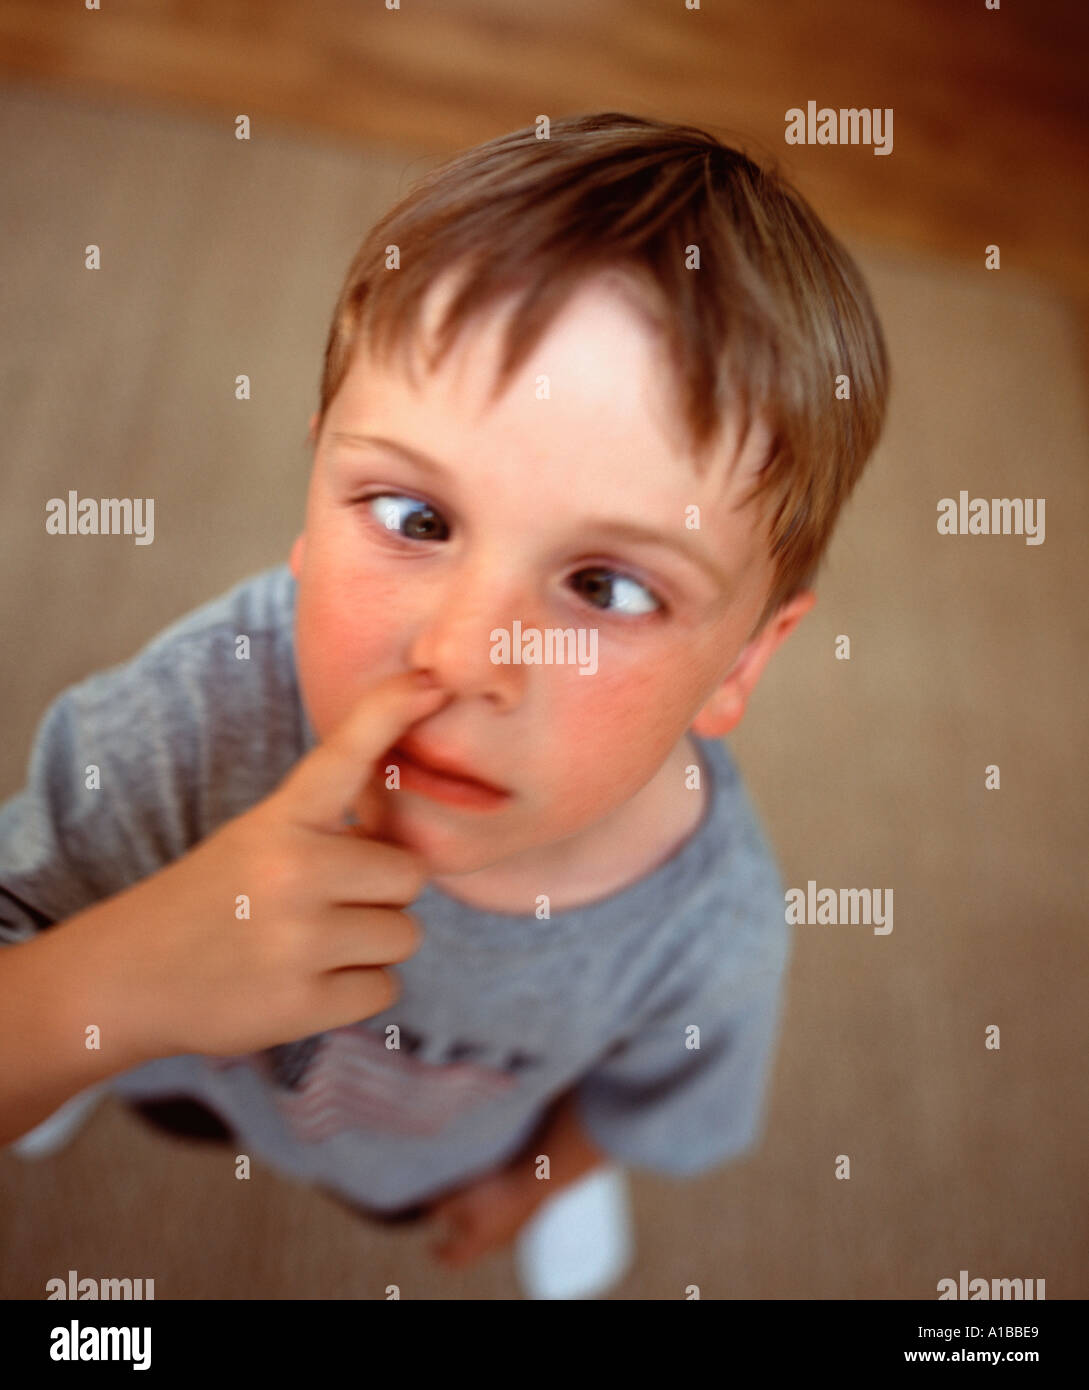 https://c8.alamy.com/comp/A1BBE9/child-making-a-cross-eyed-face-while-playing-with-nose-A1BBE9.jpg